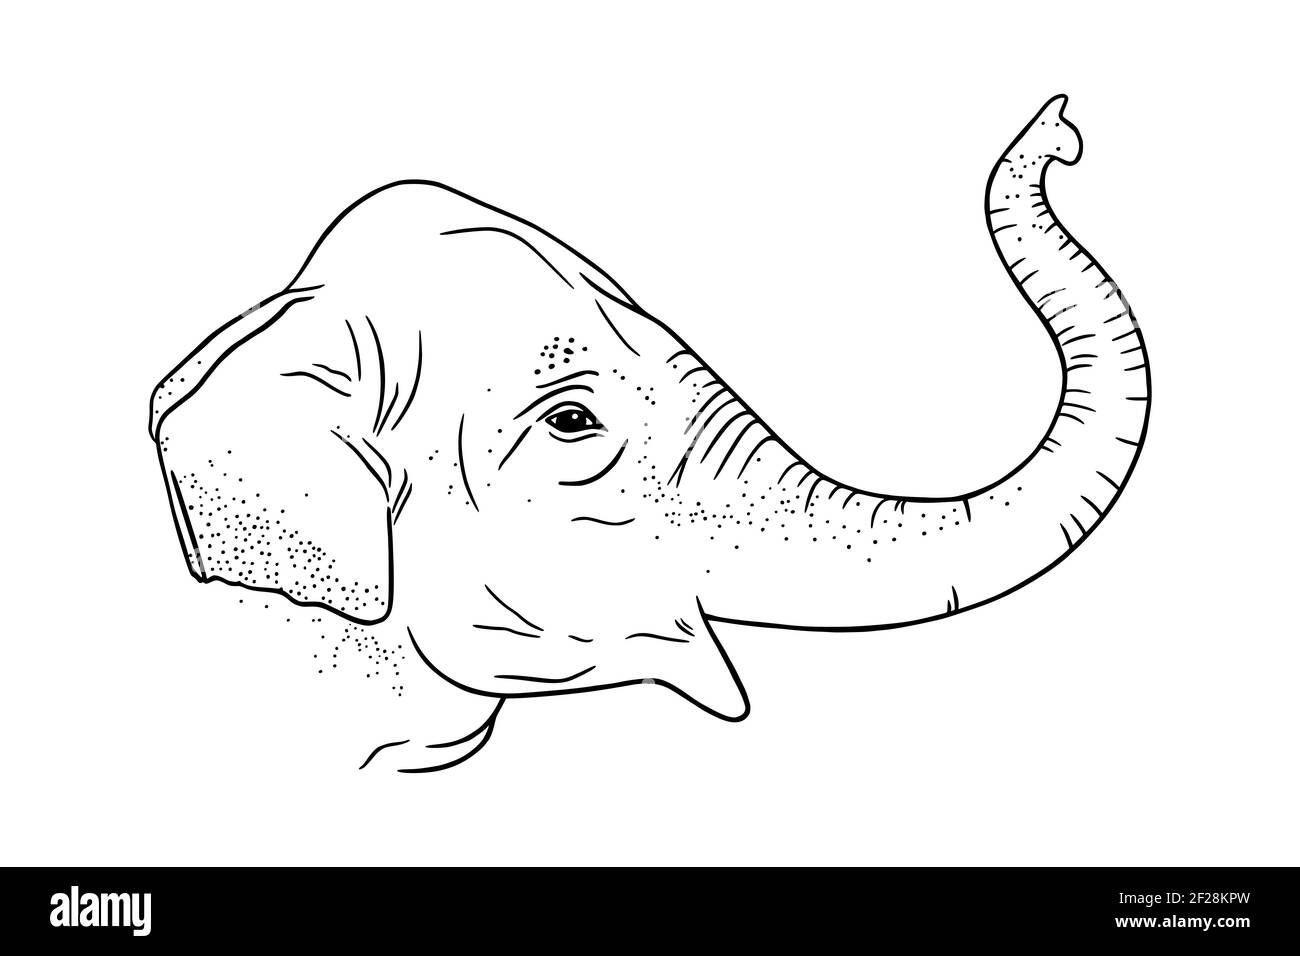 12,674 African Elephant Sketch Images, Stock Photos, 3D objects, & Vectors  | Shutterstock